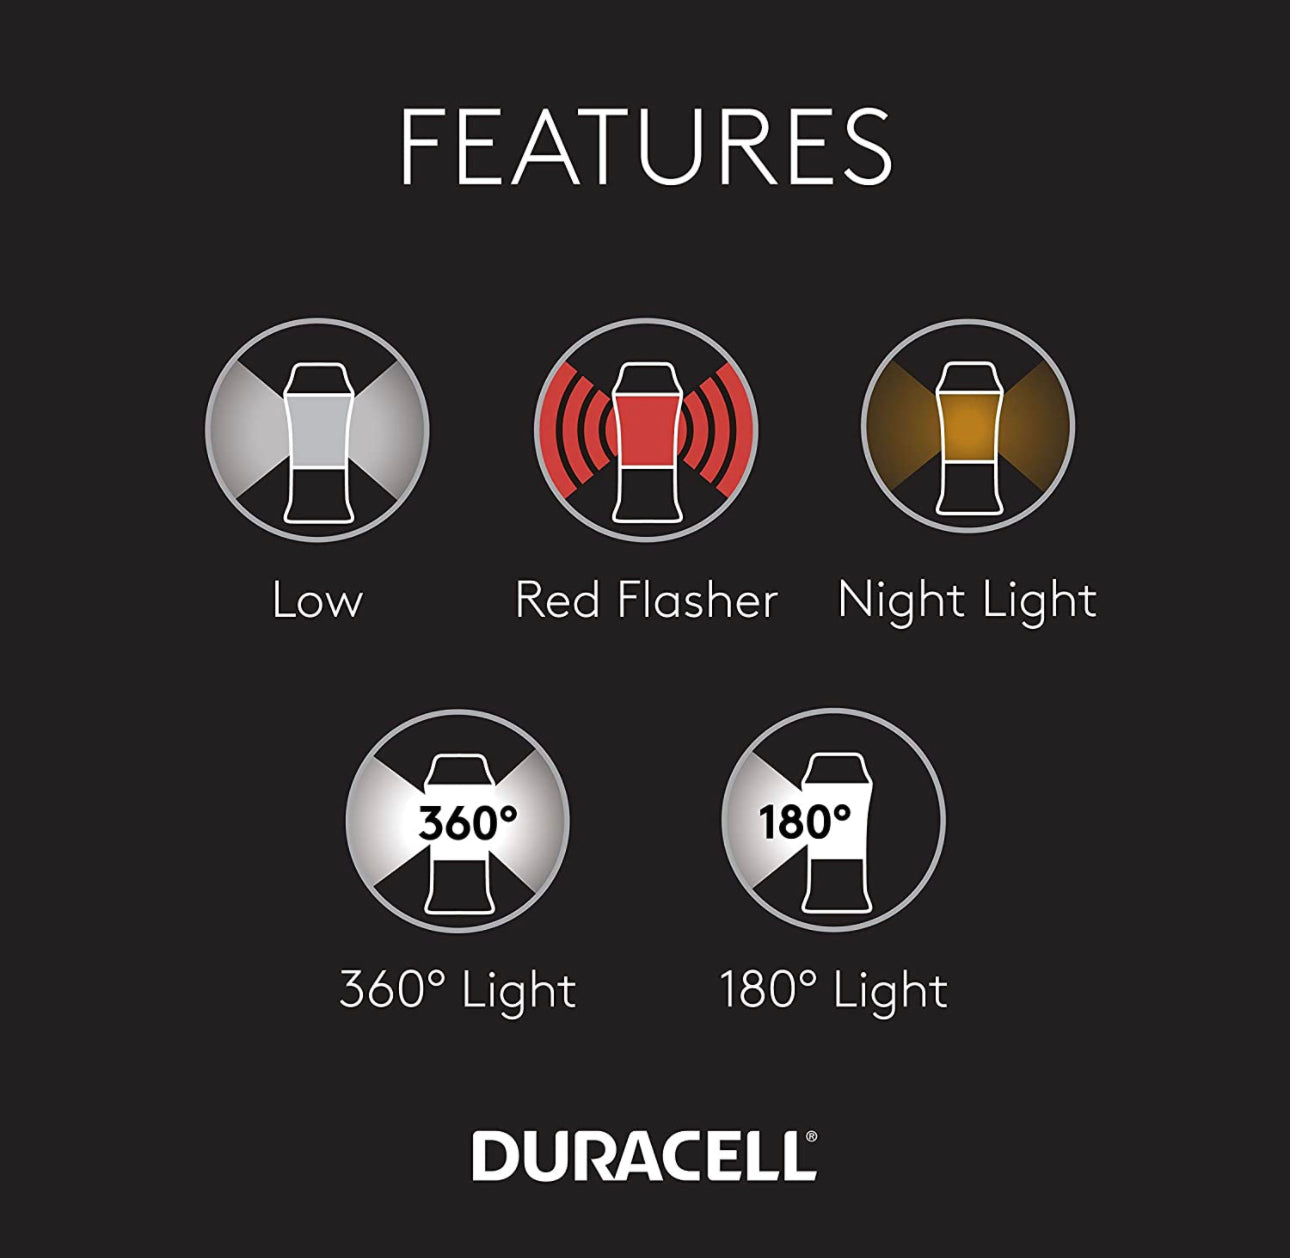 Duracell Compact Lantern With 180/360 Degree Area Lighting600 Lumens